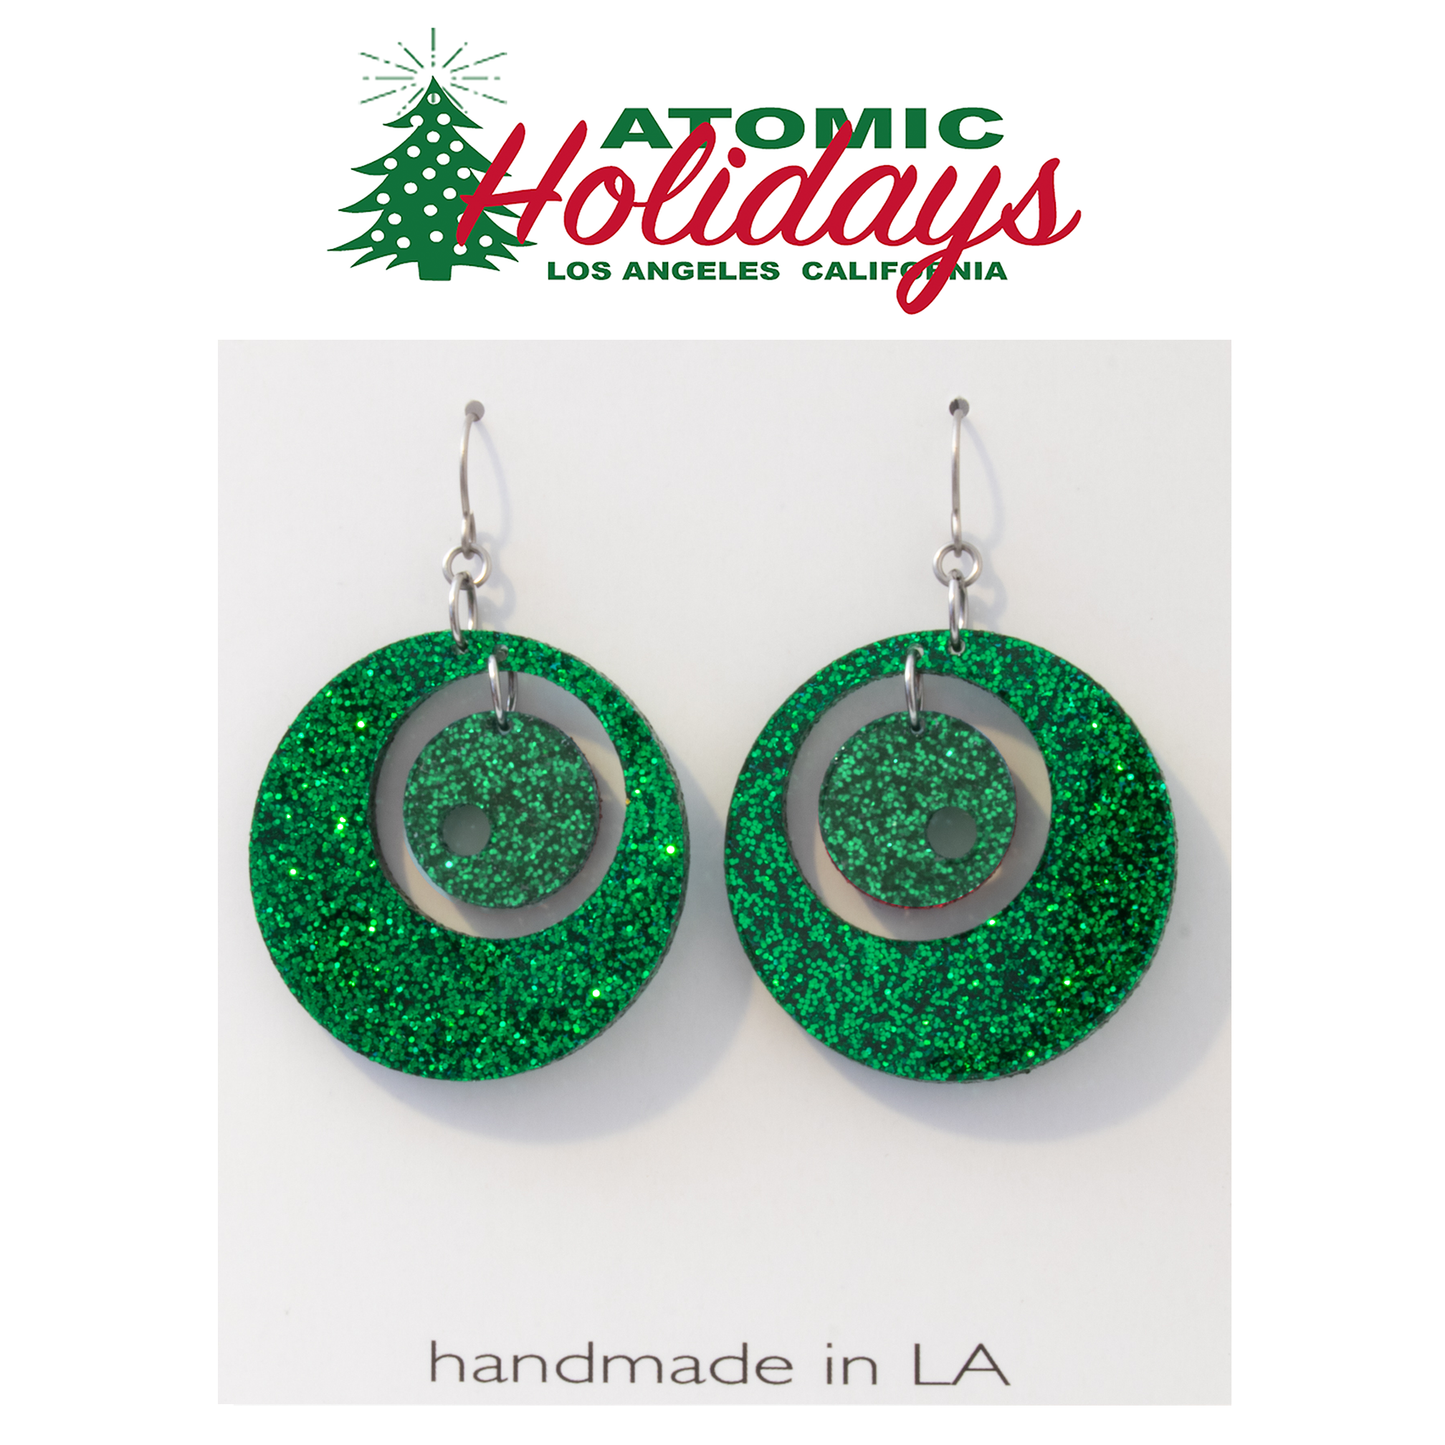 Atomic Holidays Statement Christmas Earrings in Glitter Green - mid century modern groovy style by AtomicMobiles.com 